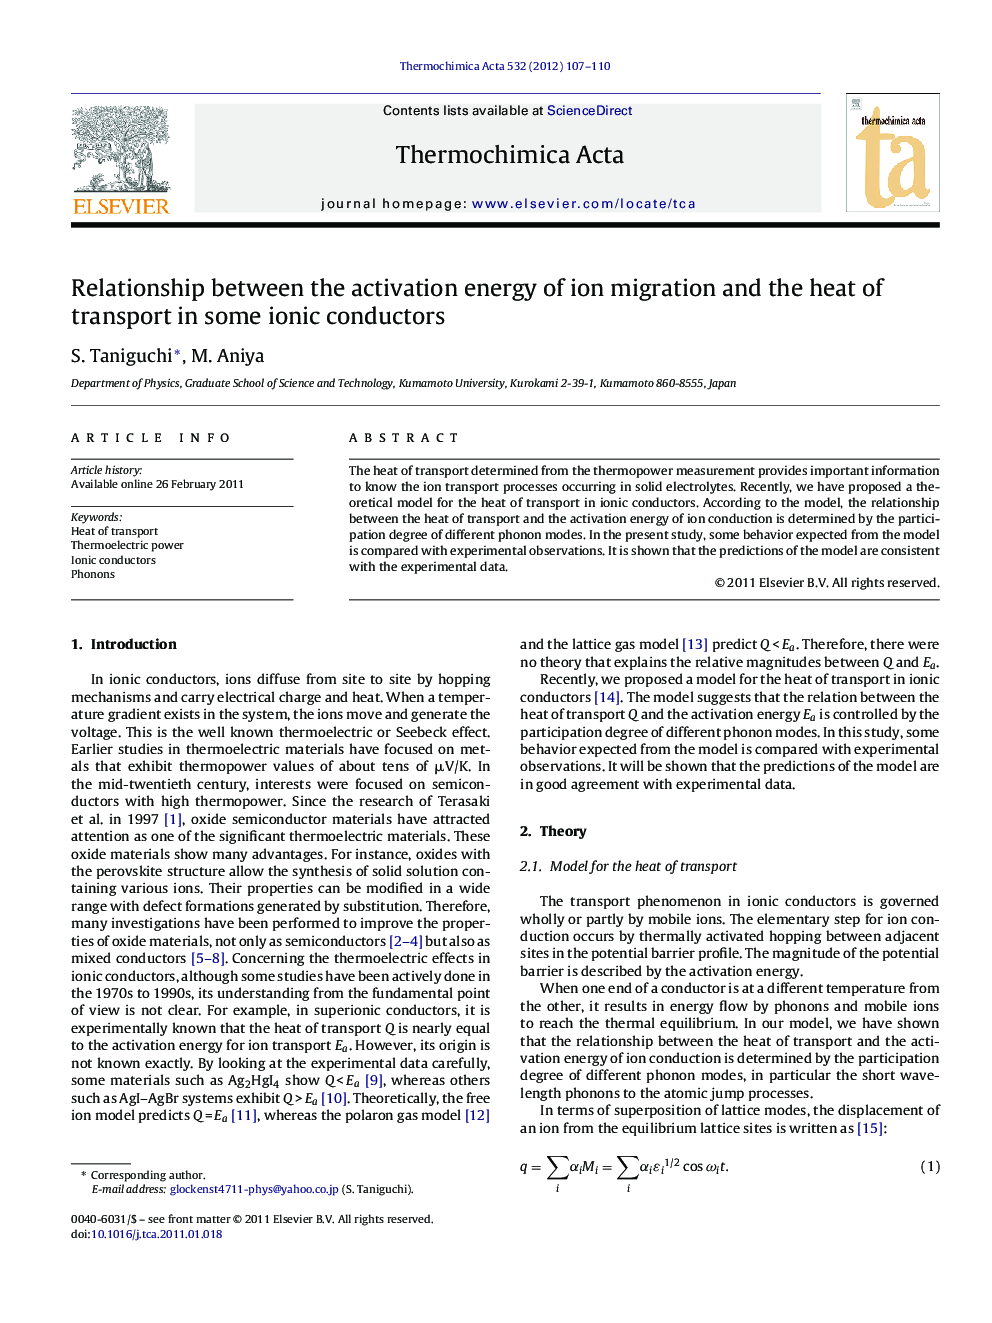 Relationship between the activation energy of ion migration and the heat of transport in some ionic conductors